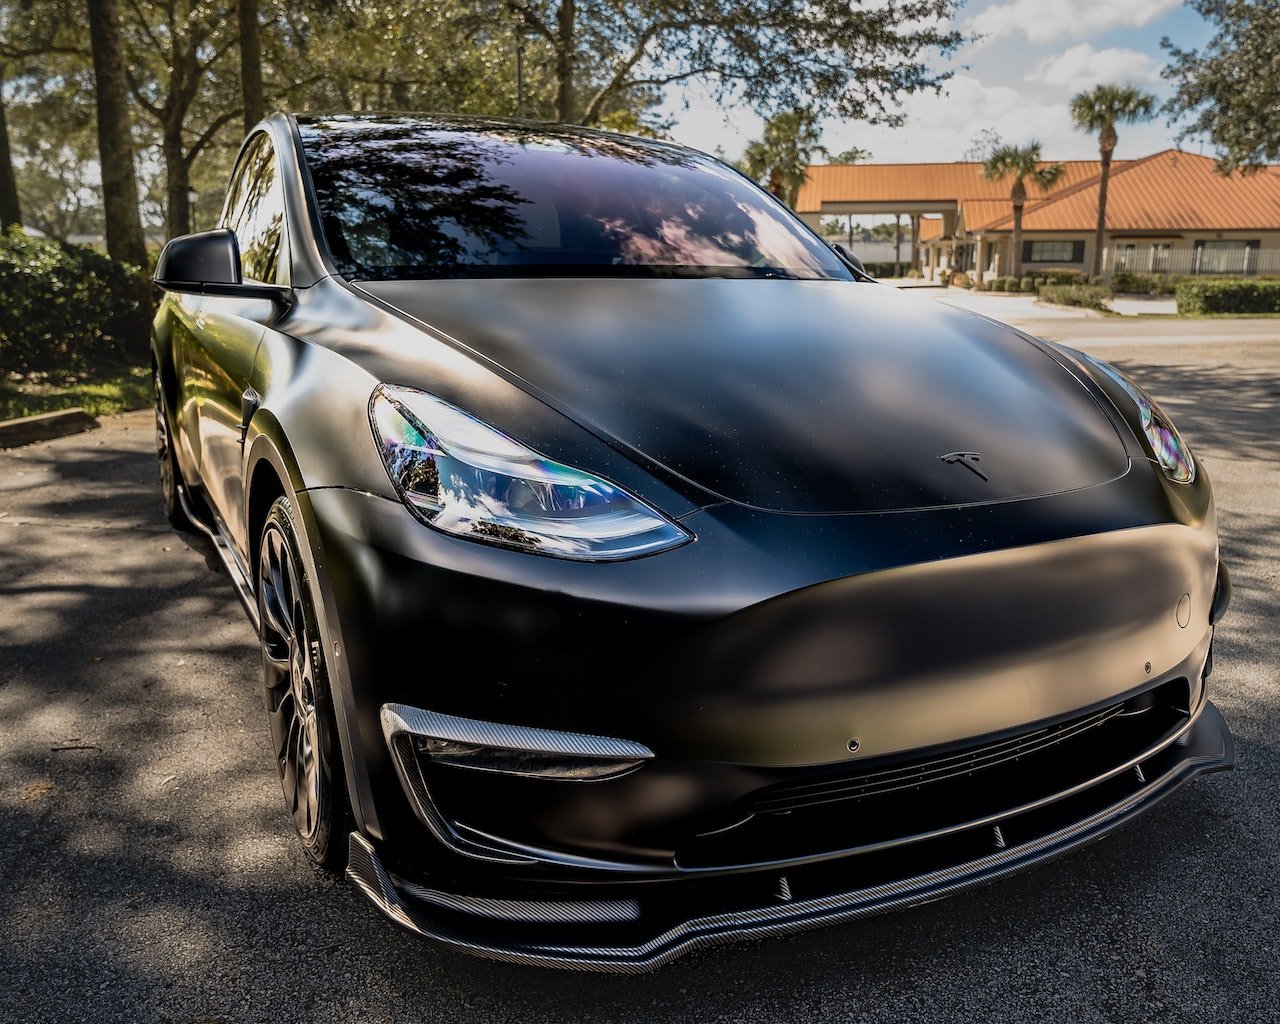 Are All Of Tesla's Cars Electric?